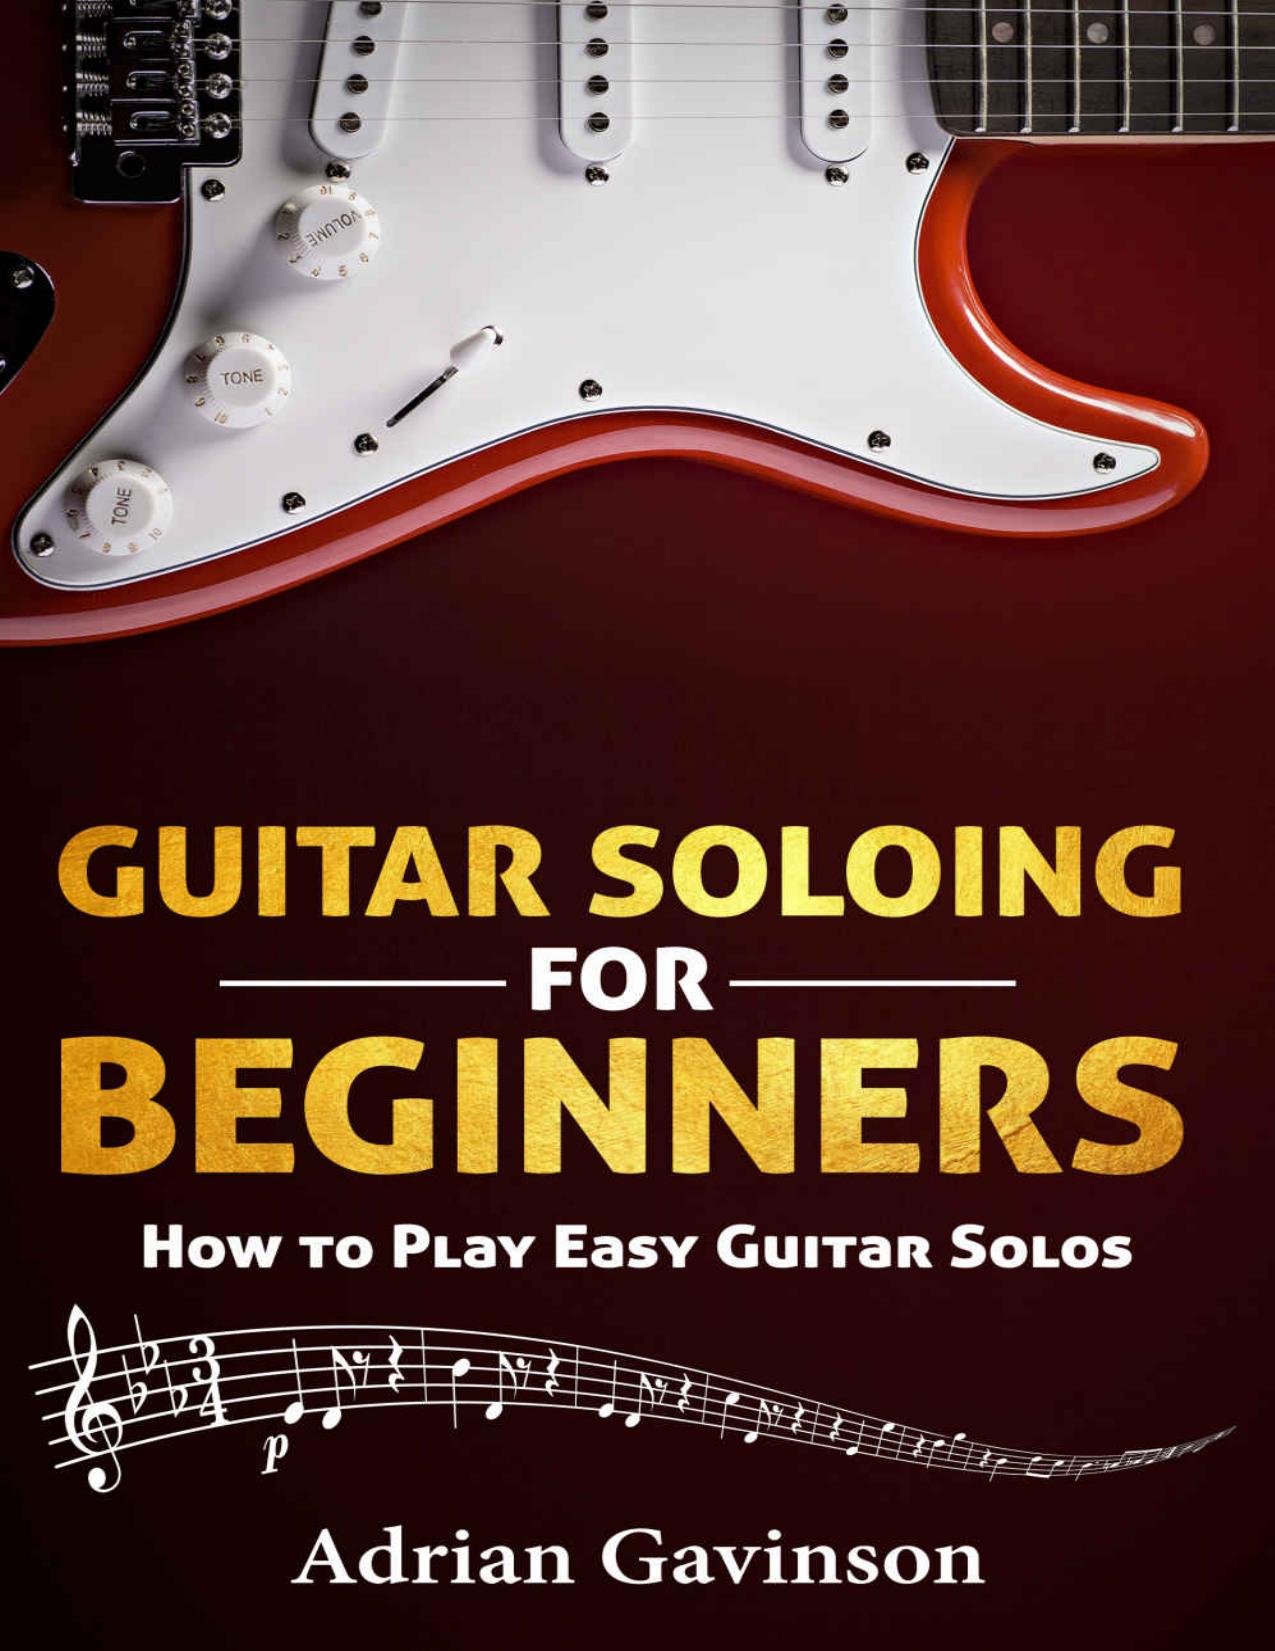 Guitar Soloing For Beginners: How to Play Easy Guitar Solos by Adrian Gavinson